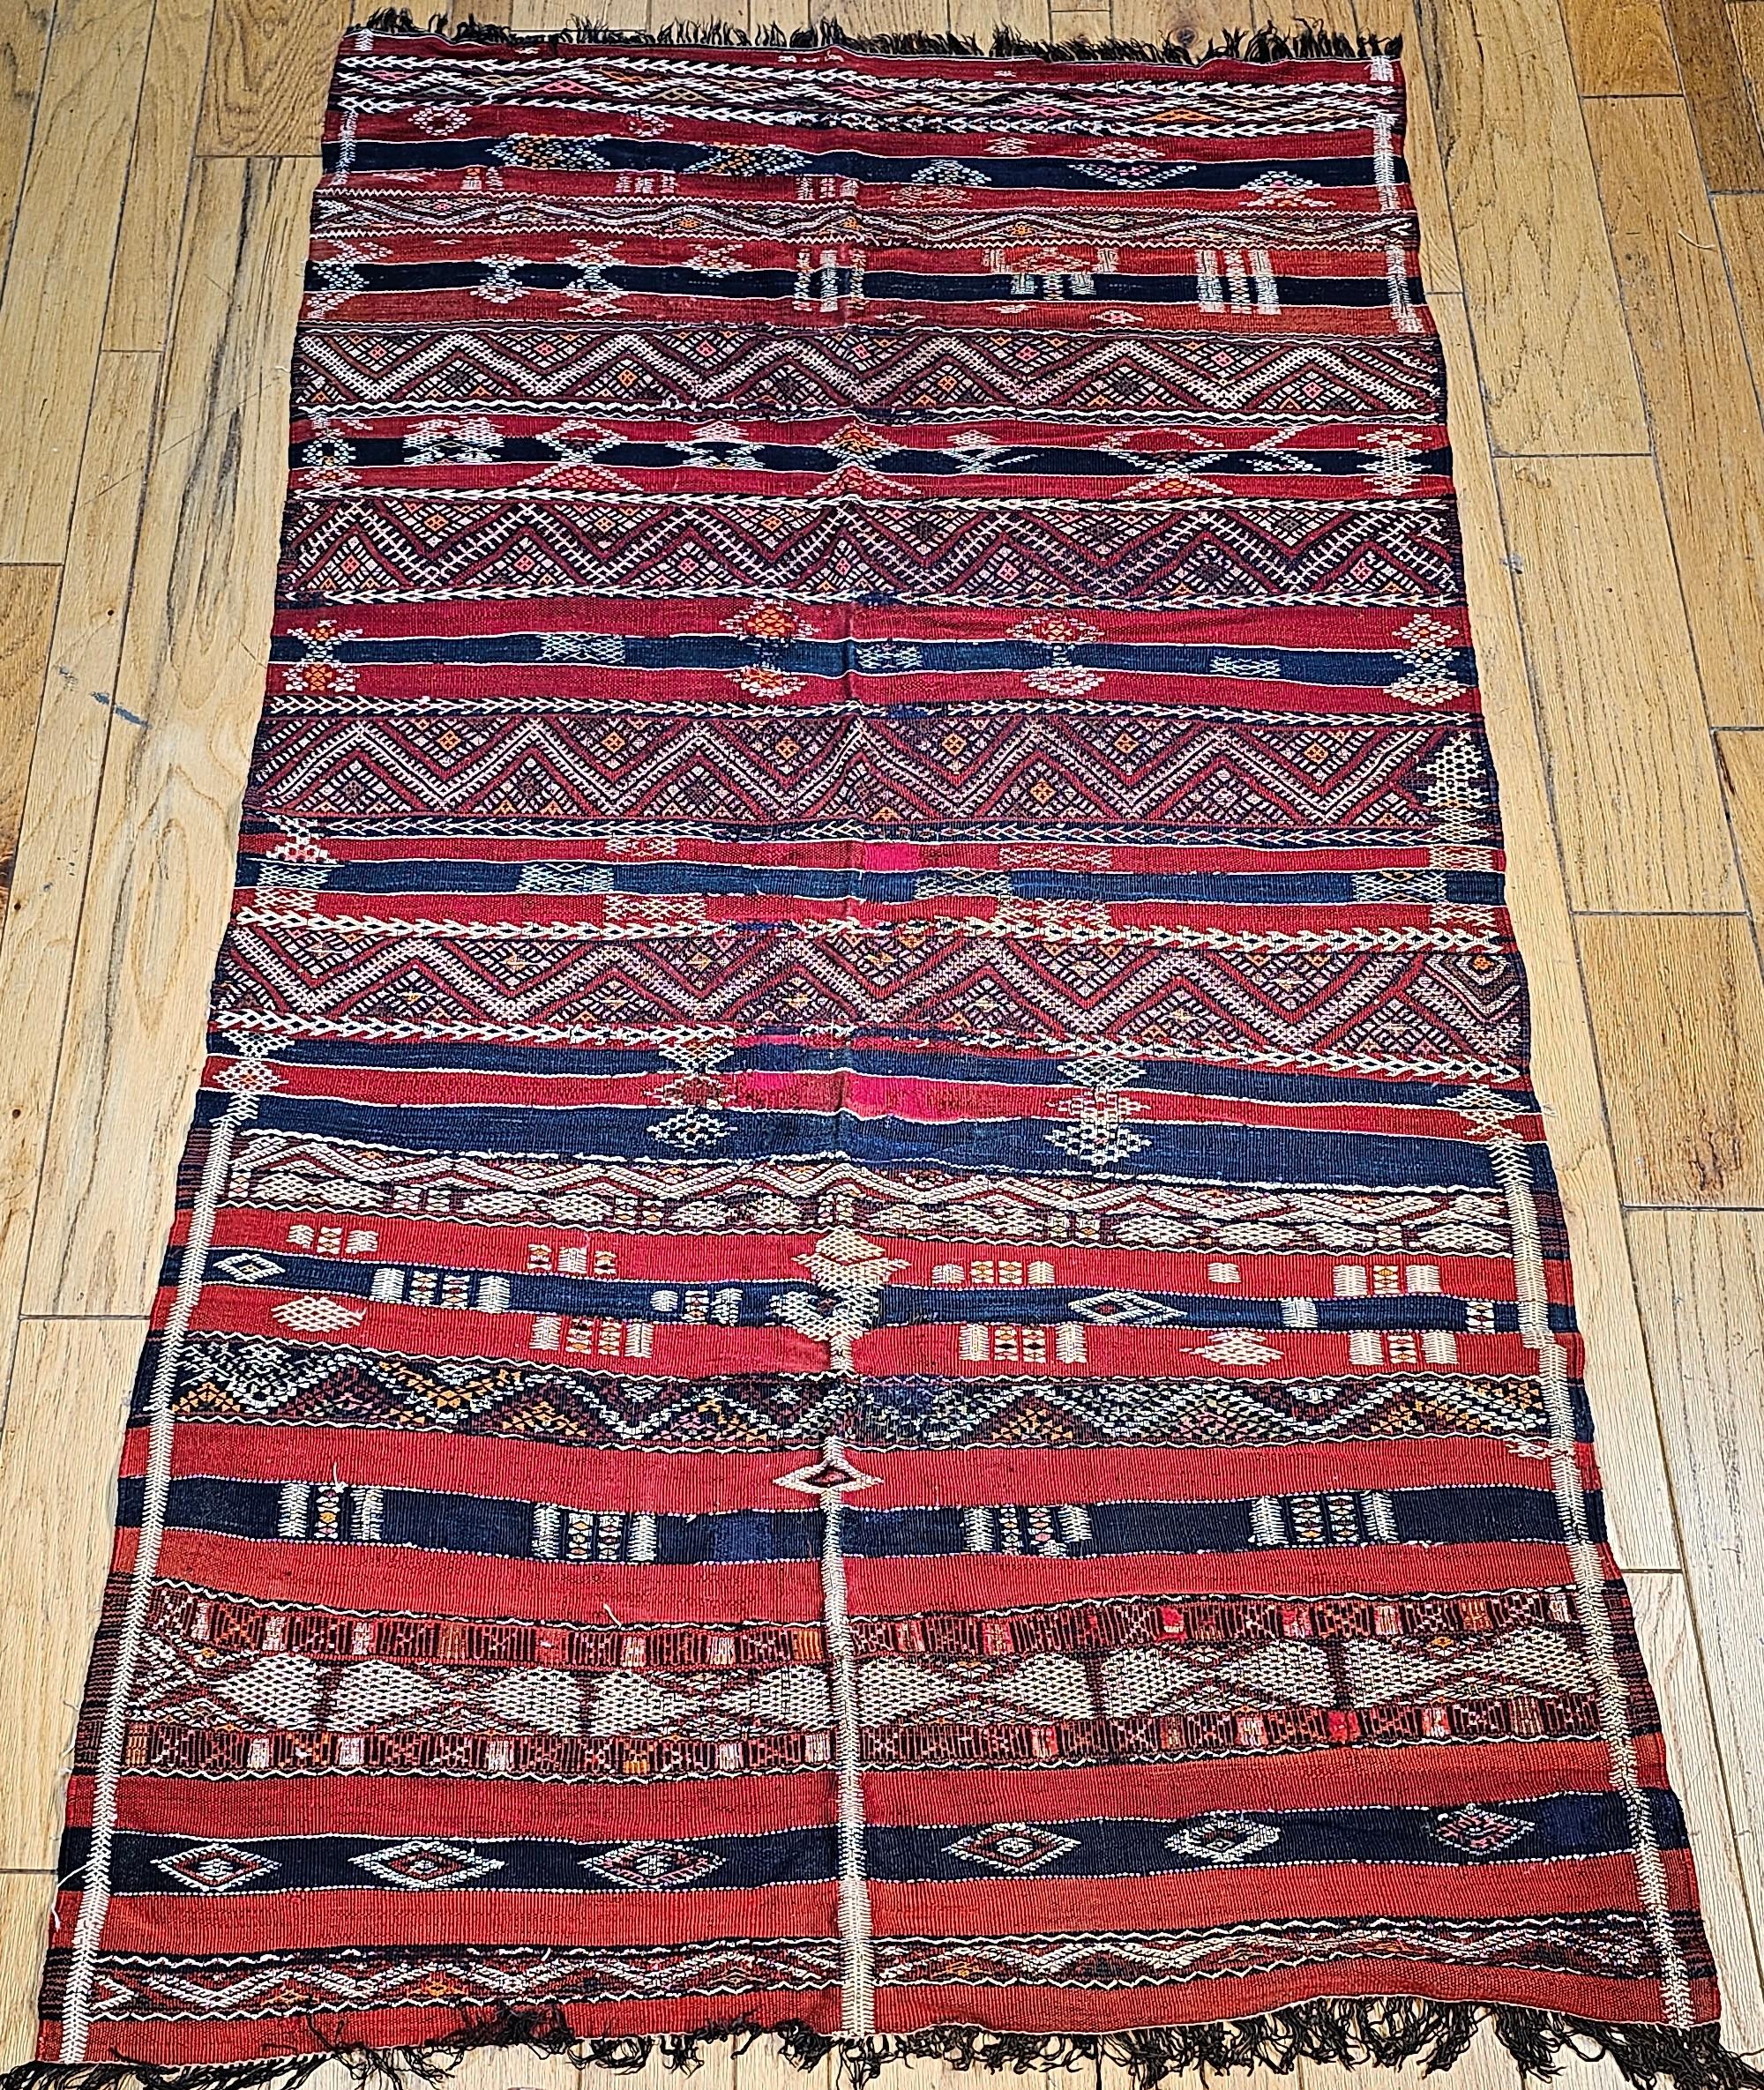  Beautiful vintage tMoroccan tribal Kilim rug from the Atlas mountains circa the mid 1900s.   Hand weaved by tribal women with traditional motives. It is an extremely fine weave and in beautiful condition. The Moroccan kilim uses bright red and